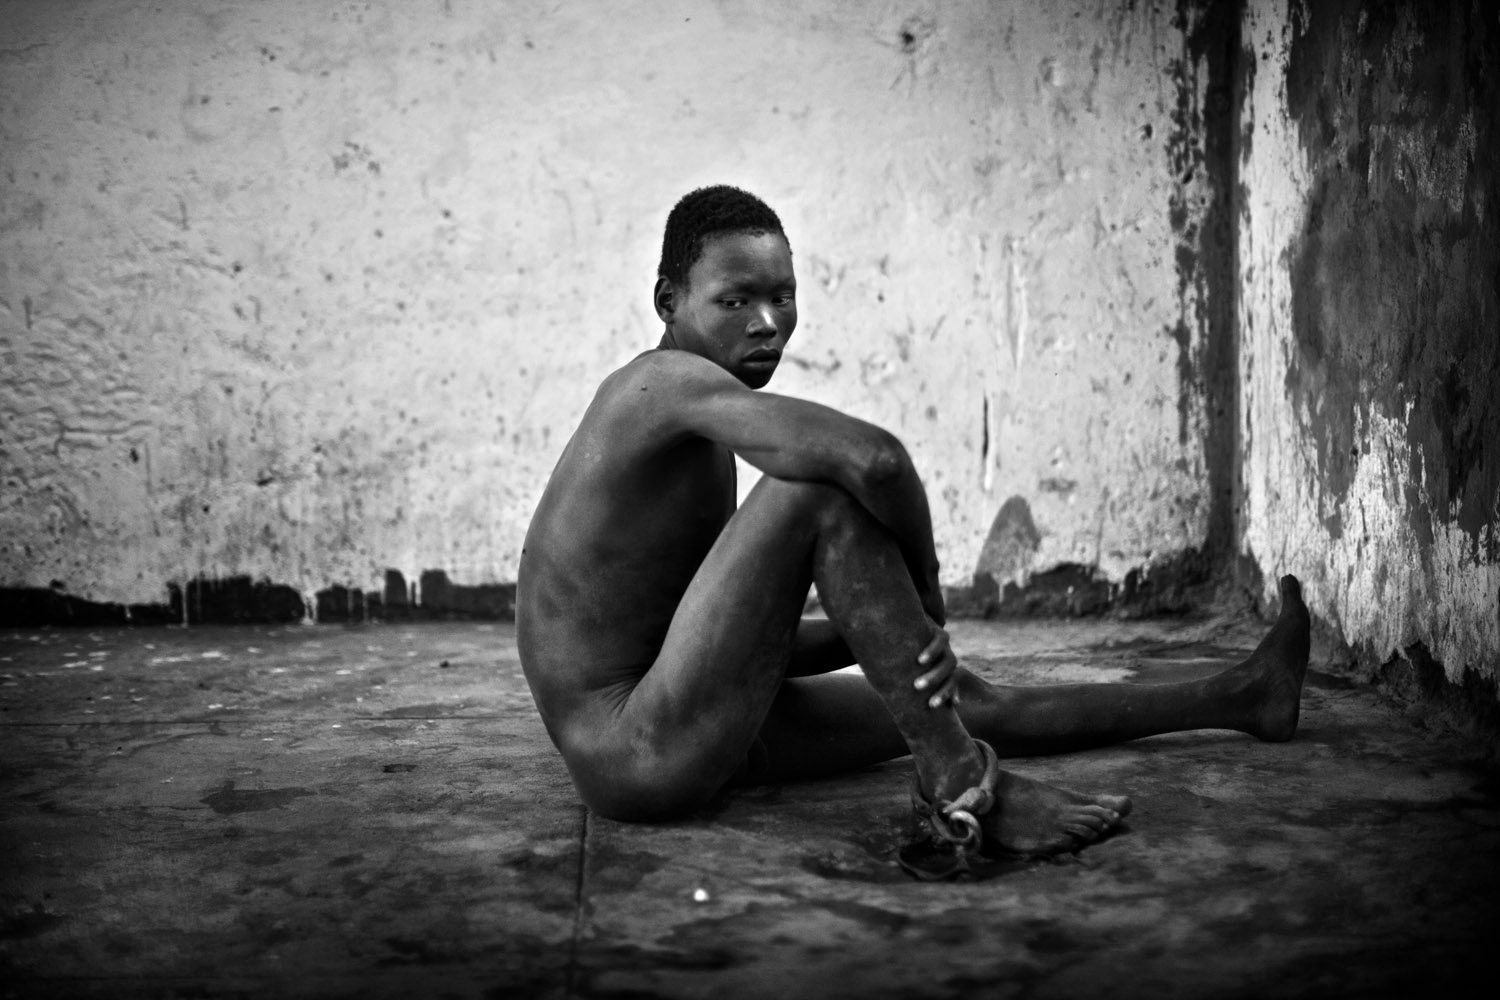 Severely mentally disabled men and women are shackled and locked away in Juba Central Prison for years on end. The new nation of South Sudan faces a tremendous challenge to build a modern country capable of caring for all of its citizens. Juba, Sudan. January 2011. Photo Robin Hammond/Panos